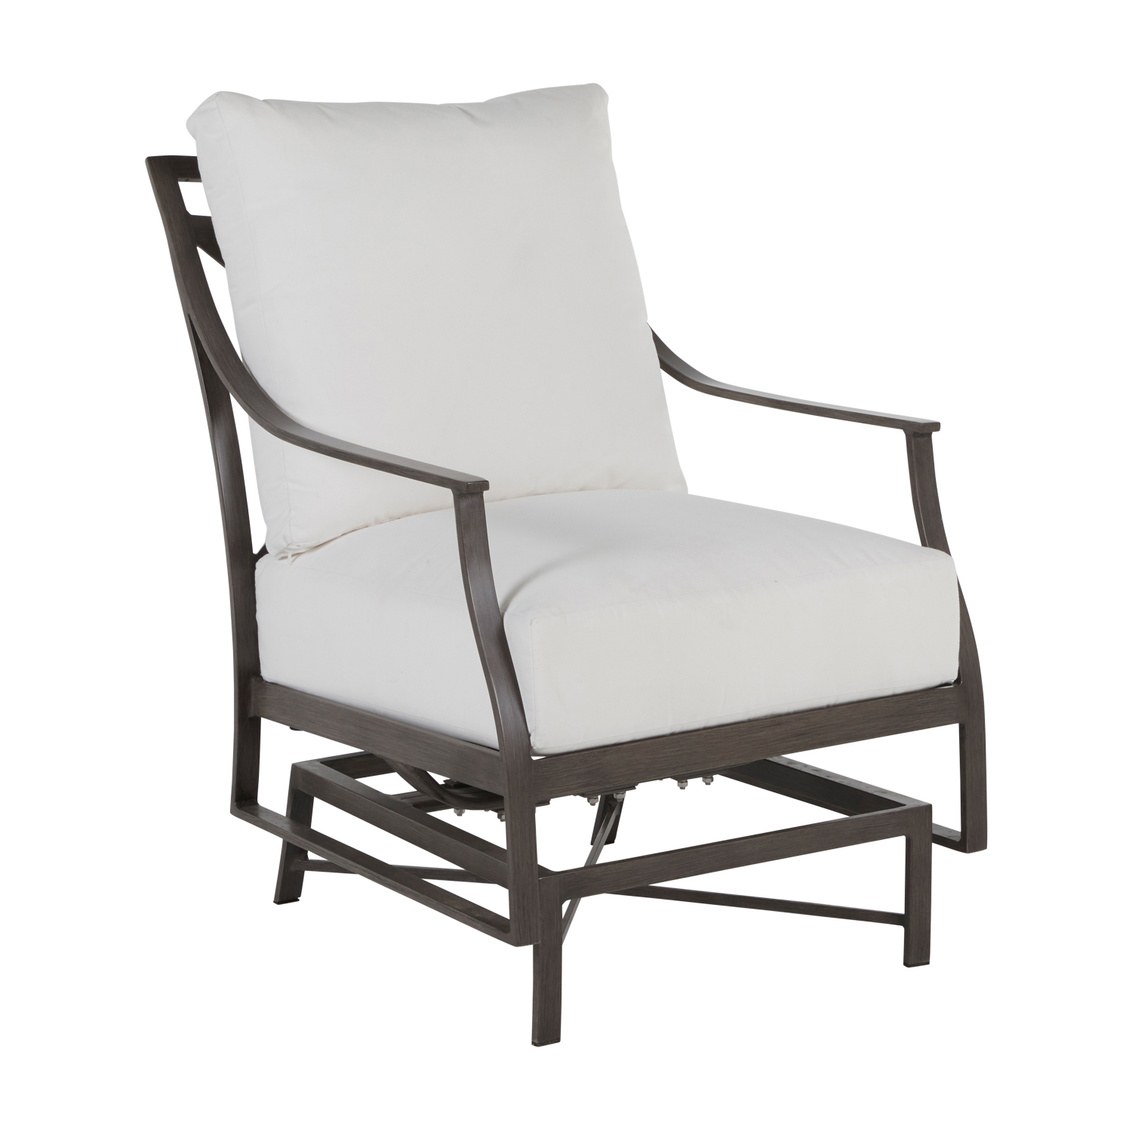 monaco aluminum spring lounge in slate grey – frame only product image